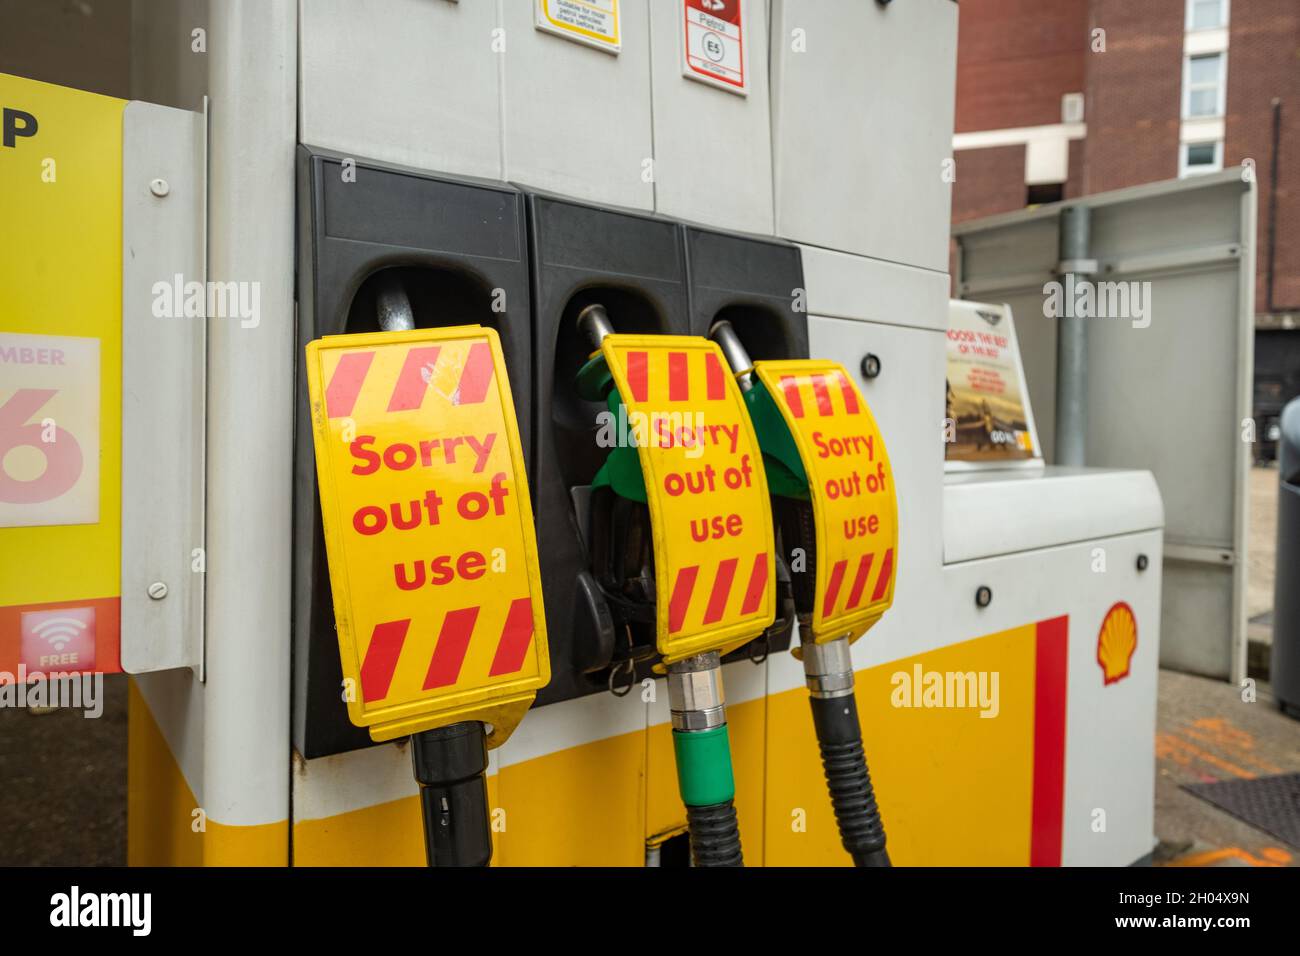 London, 2nd October 2021: Fuel pumps out of use due to the national fuel shortages across the U.K. due to shortage of delivery drivers Stock Photo